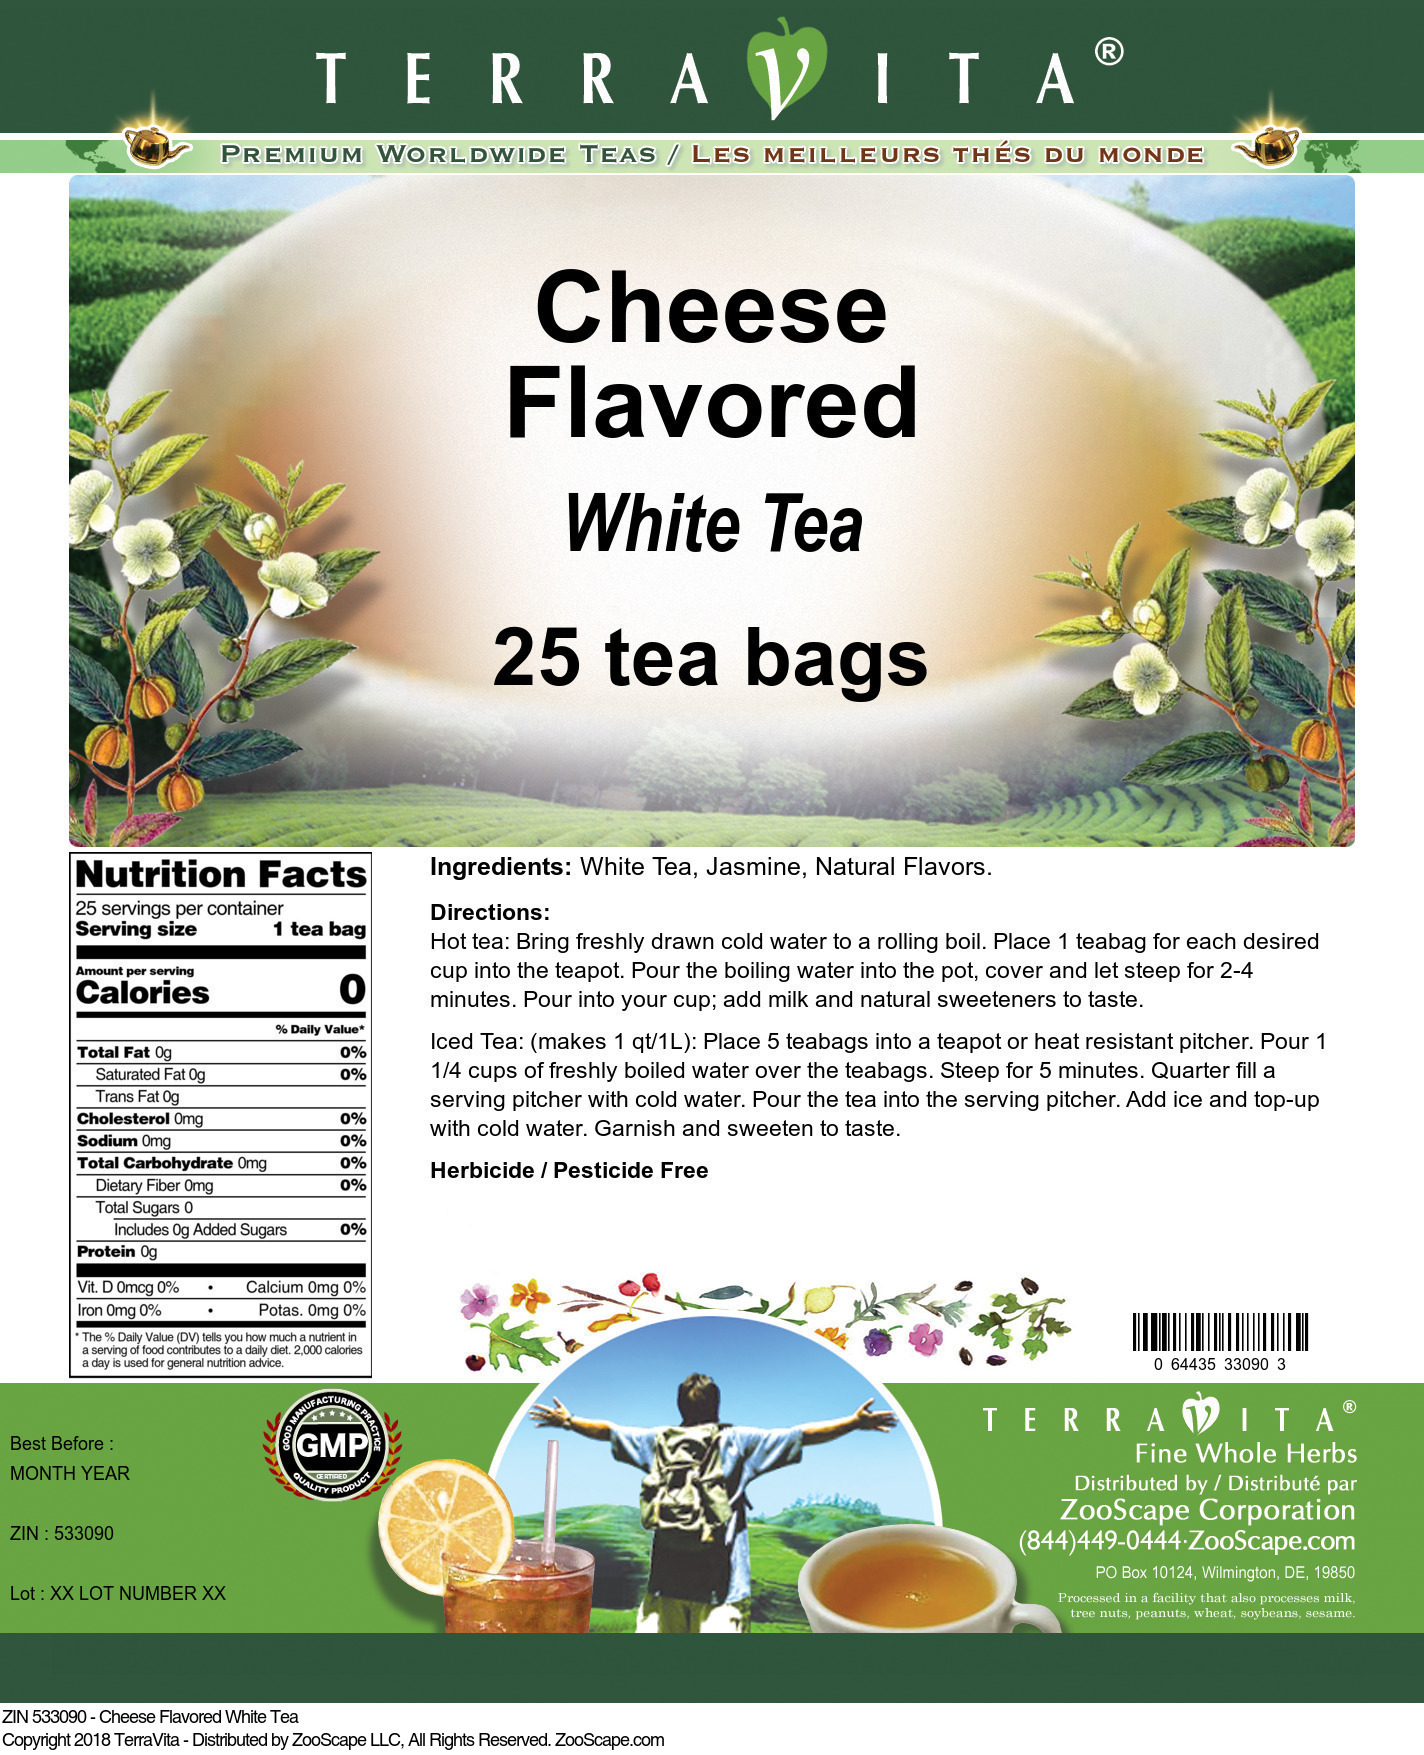 Cheese Flavored White Tea - Label